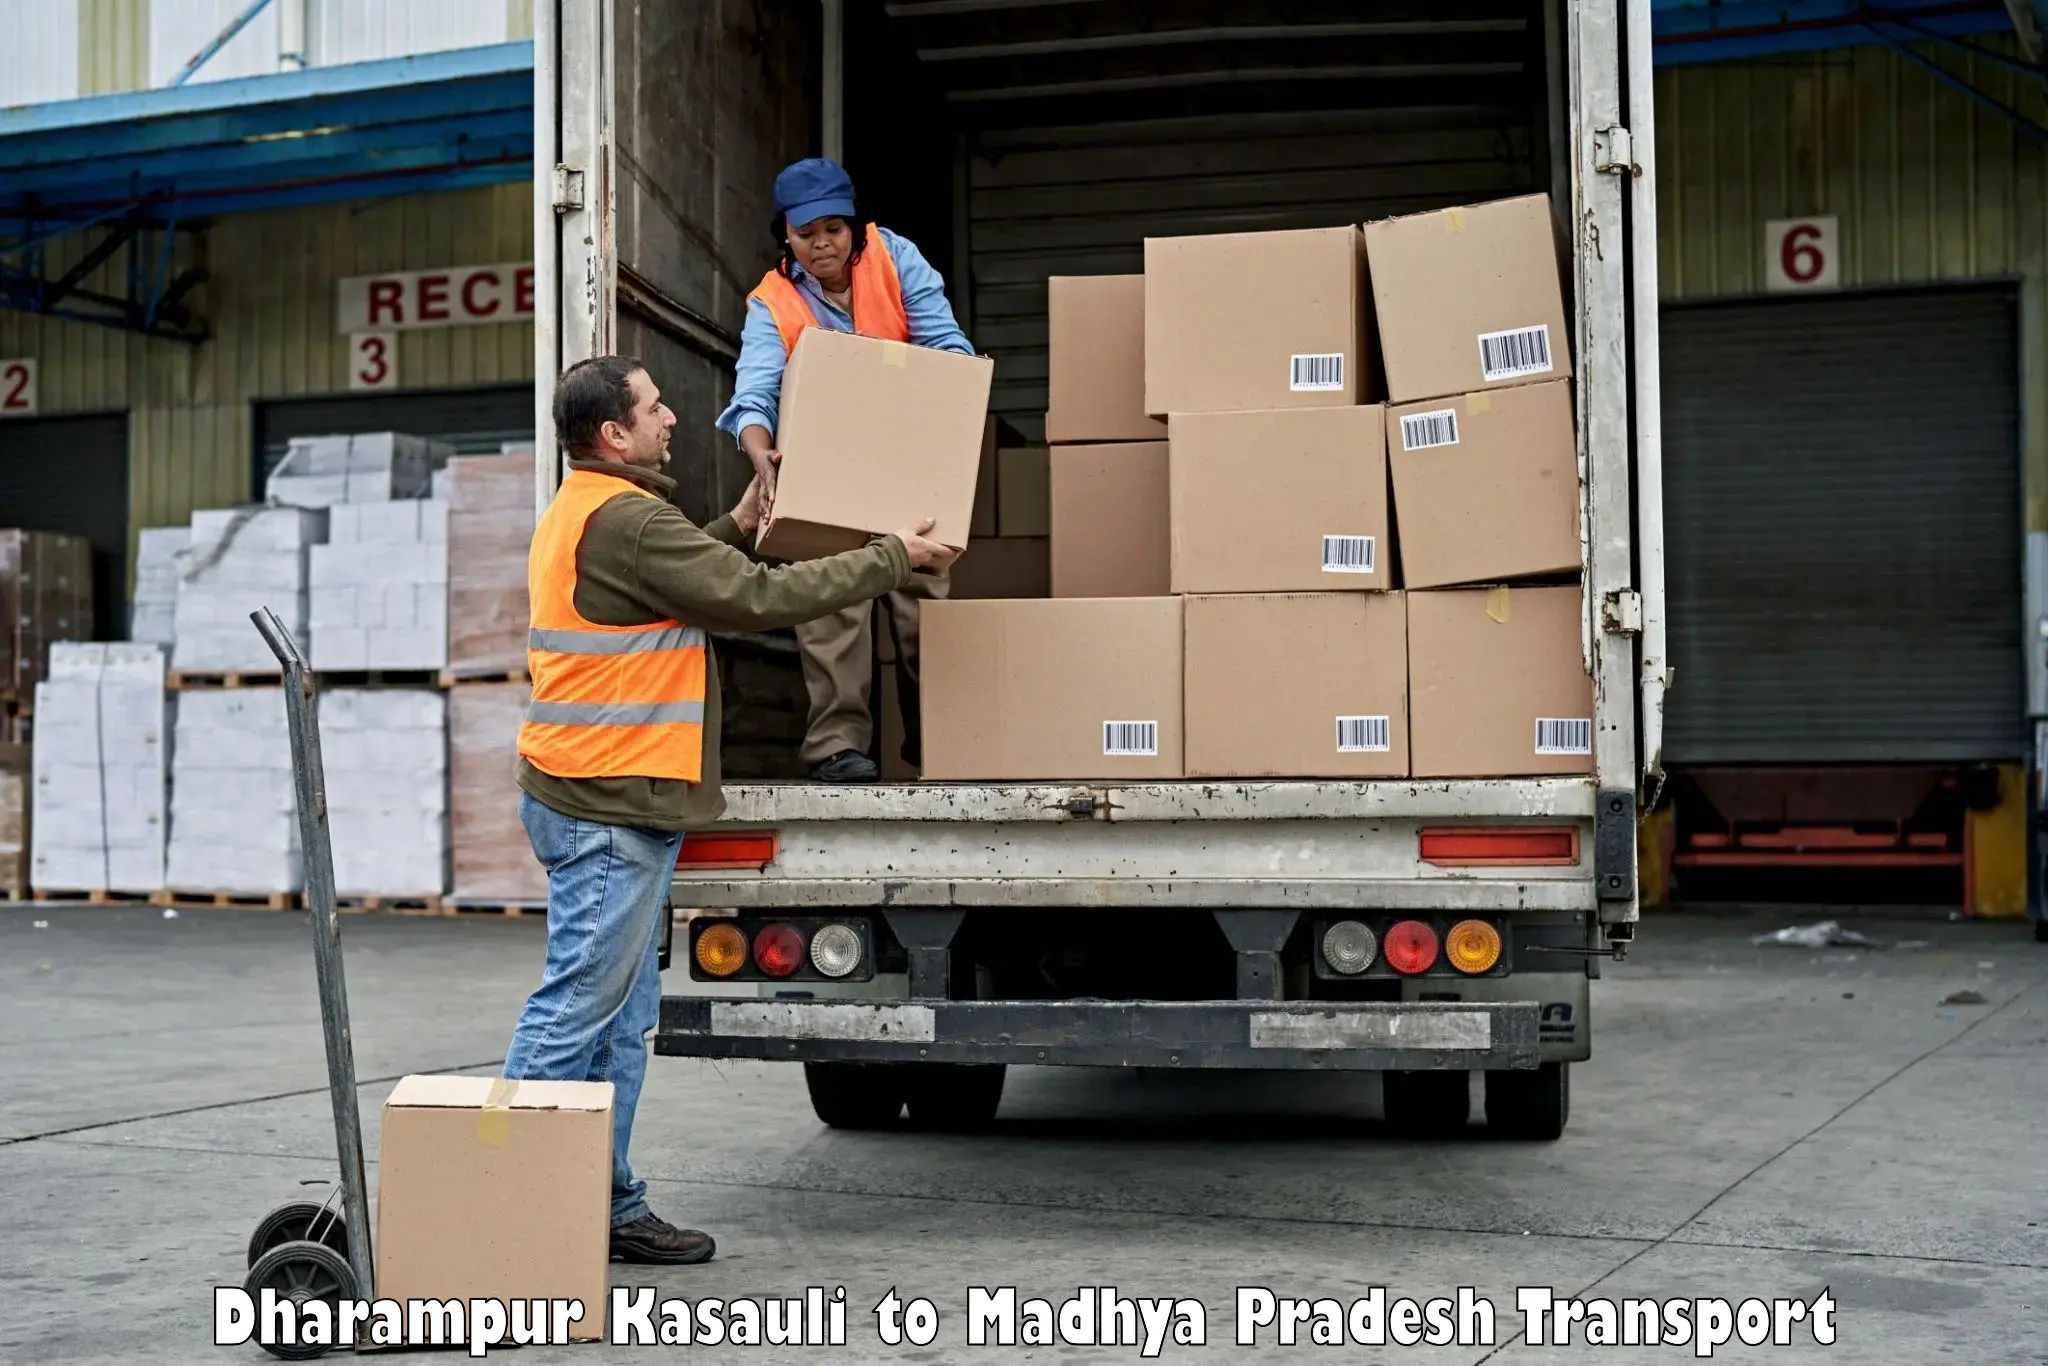 Part load transport service in India Dharampur Kasauli to Shahgarh